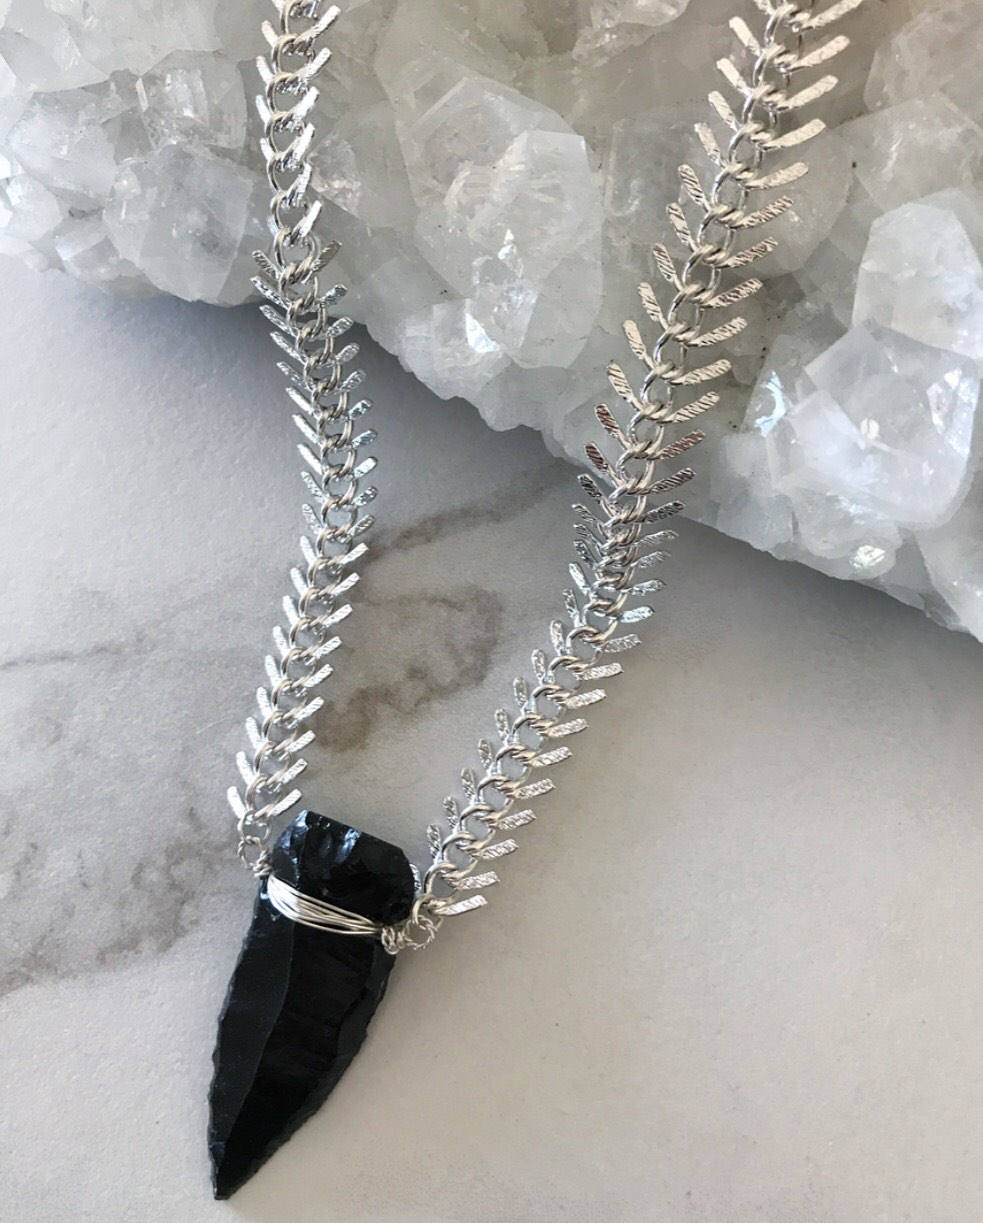 Arrowhead Necklace Obsidian, Gold Statement Choker, Black Arrowhead Necklace, Arrowhead Pendant, Arrowhead Necklace Silver, Gold Boho Choker